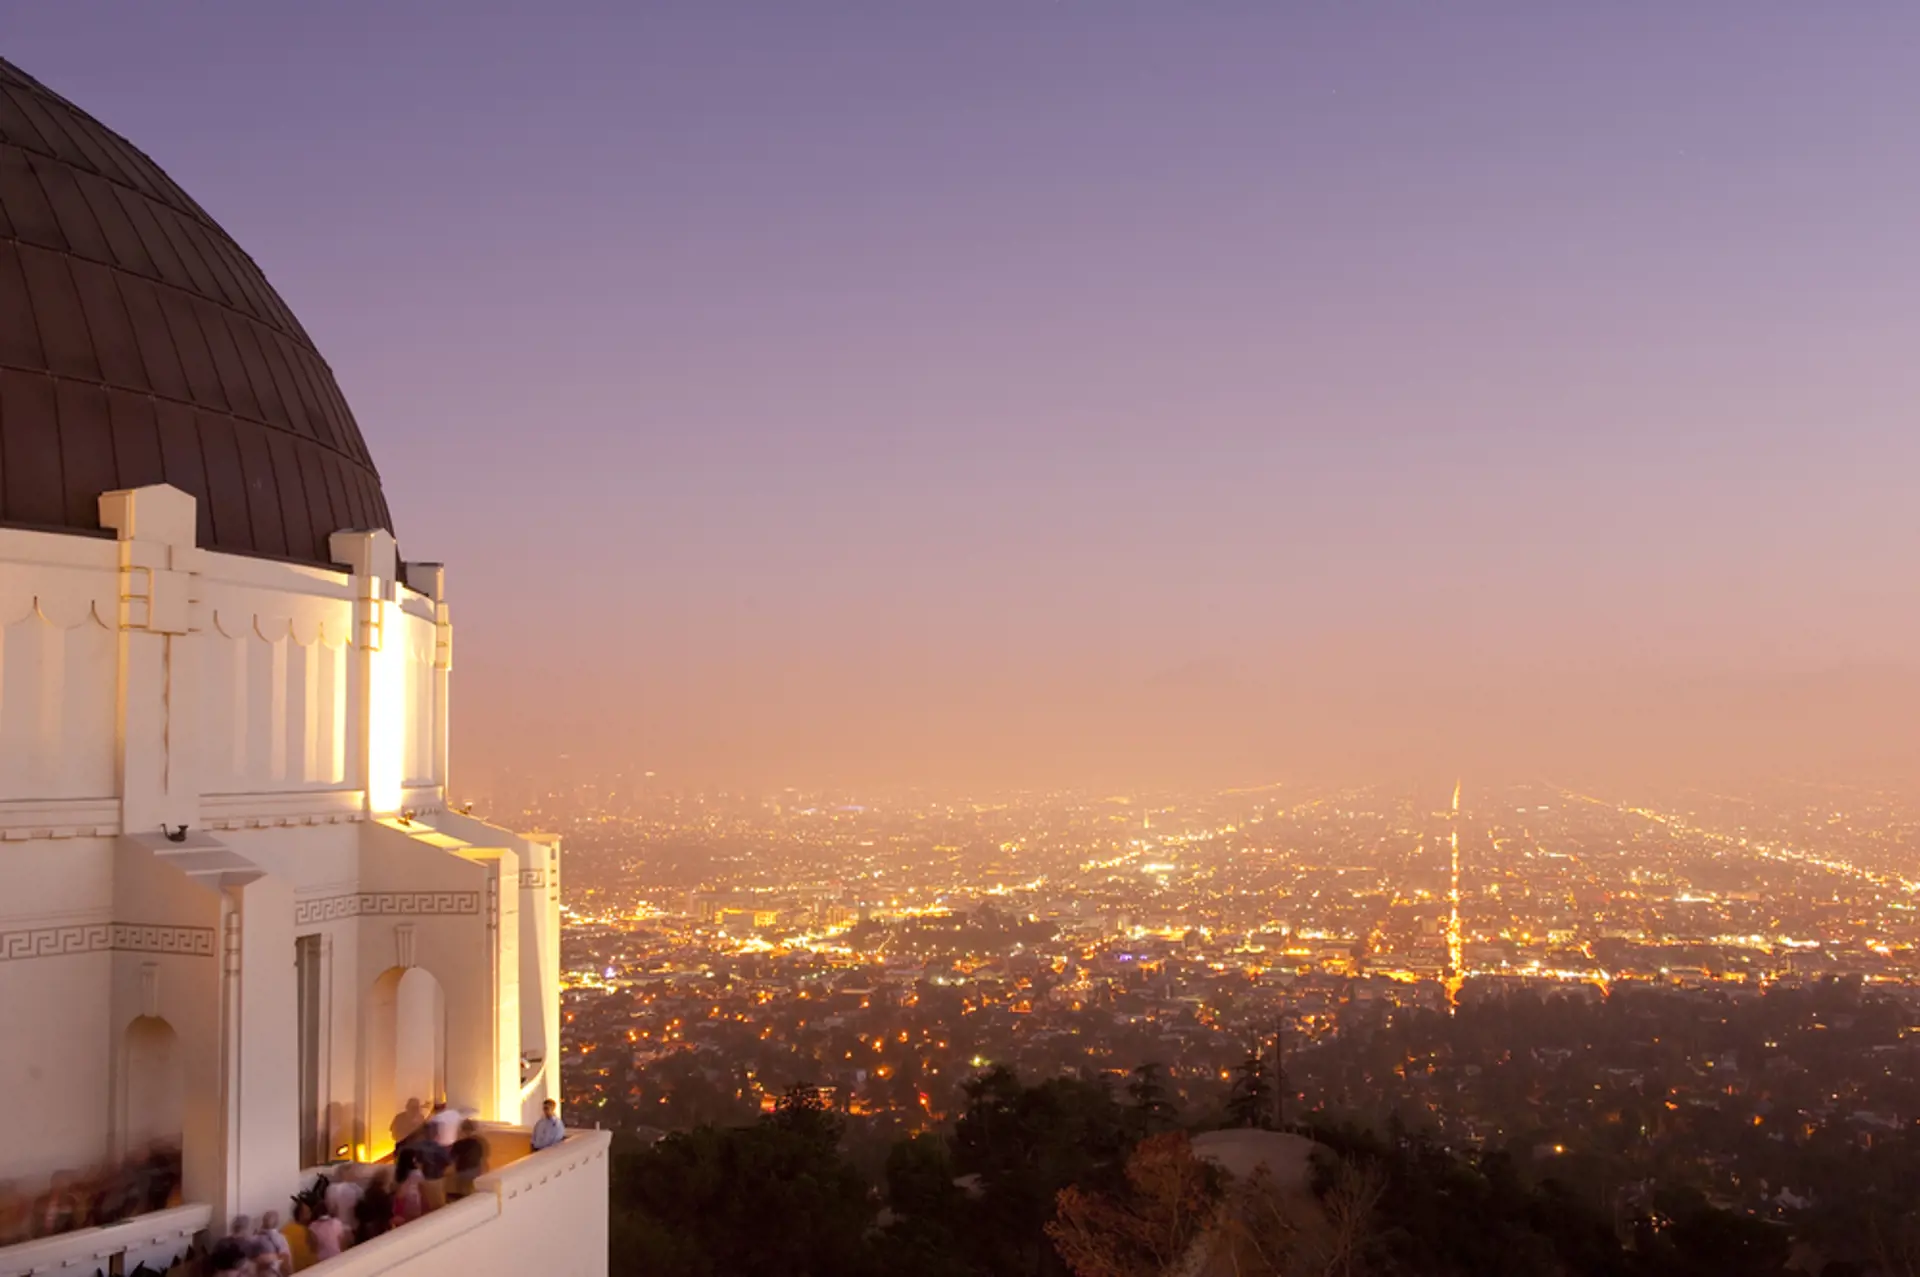 USA - California - Los Angeles - Griffith Observatory.jpg